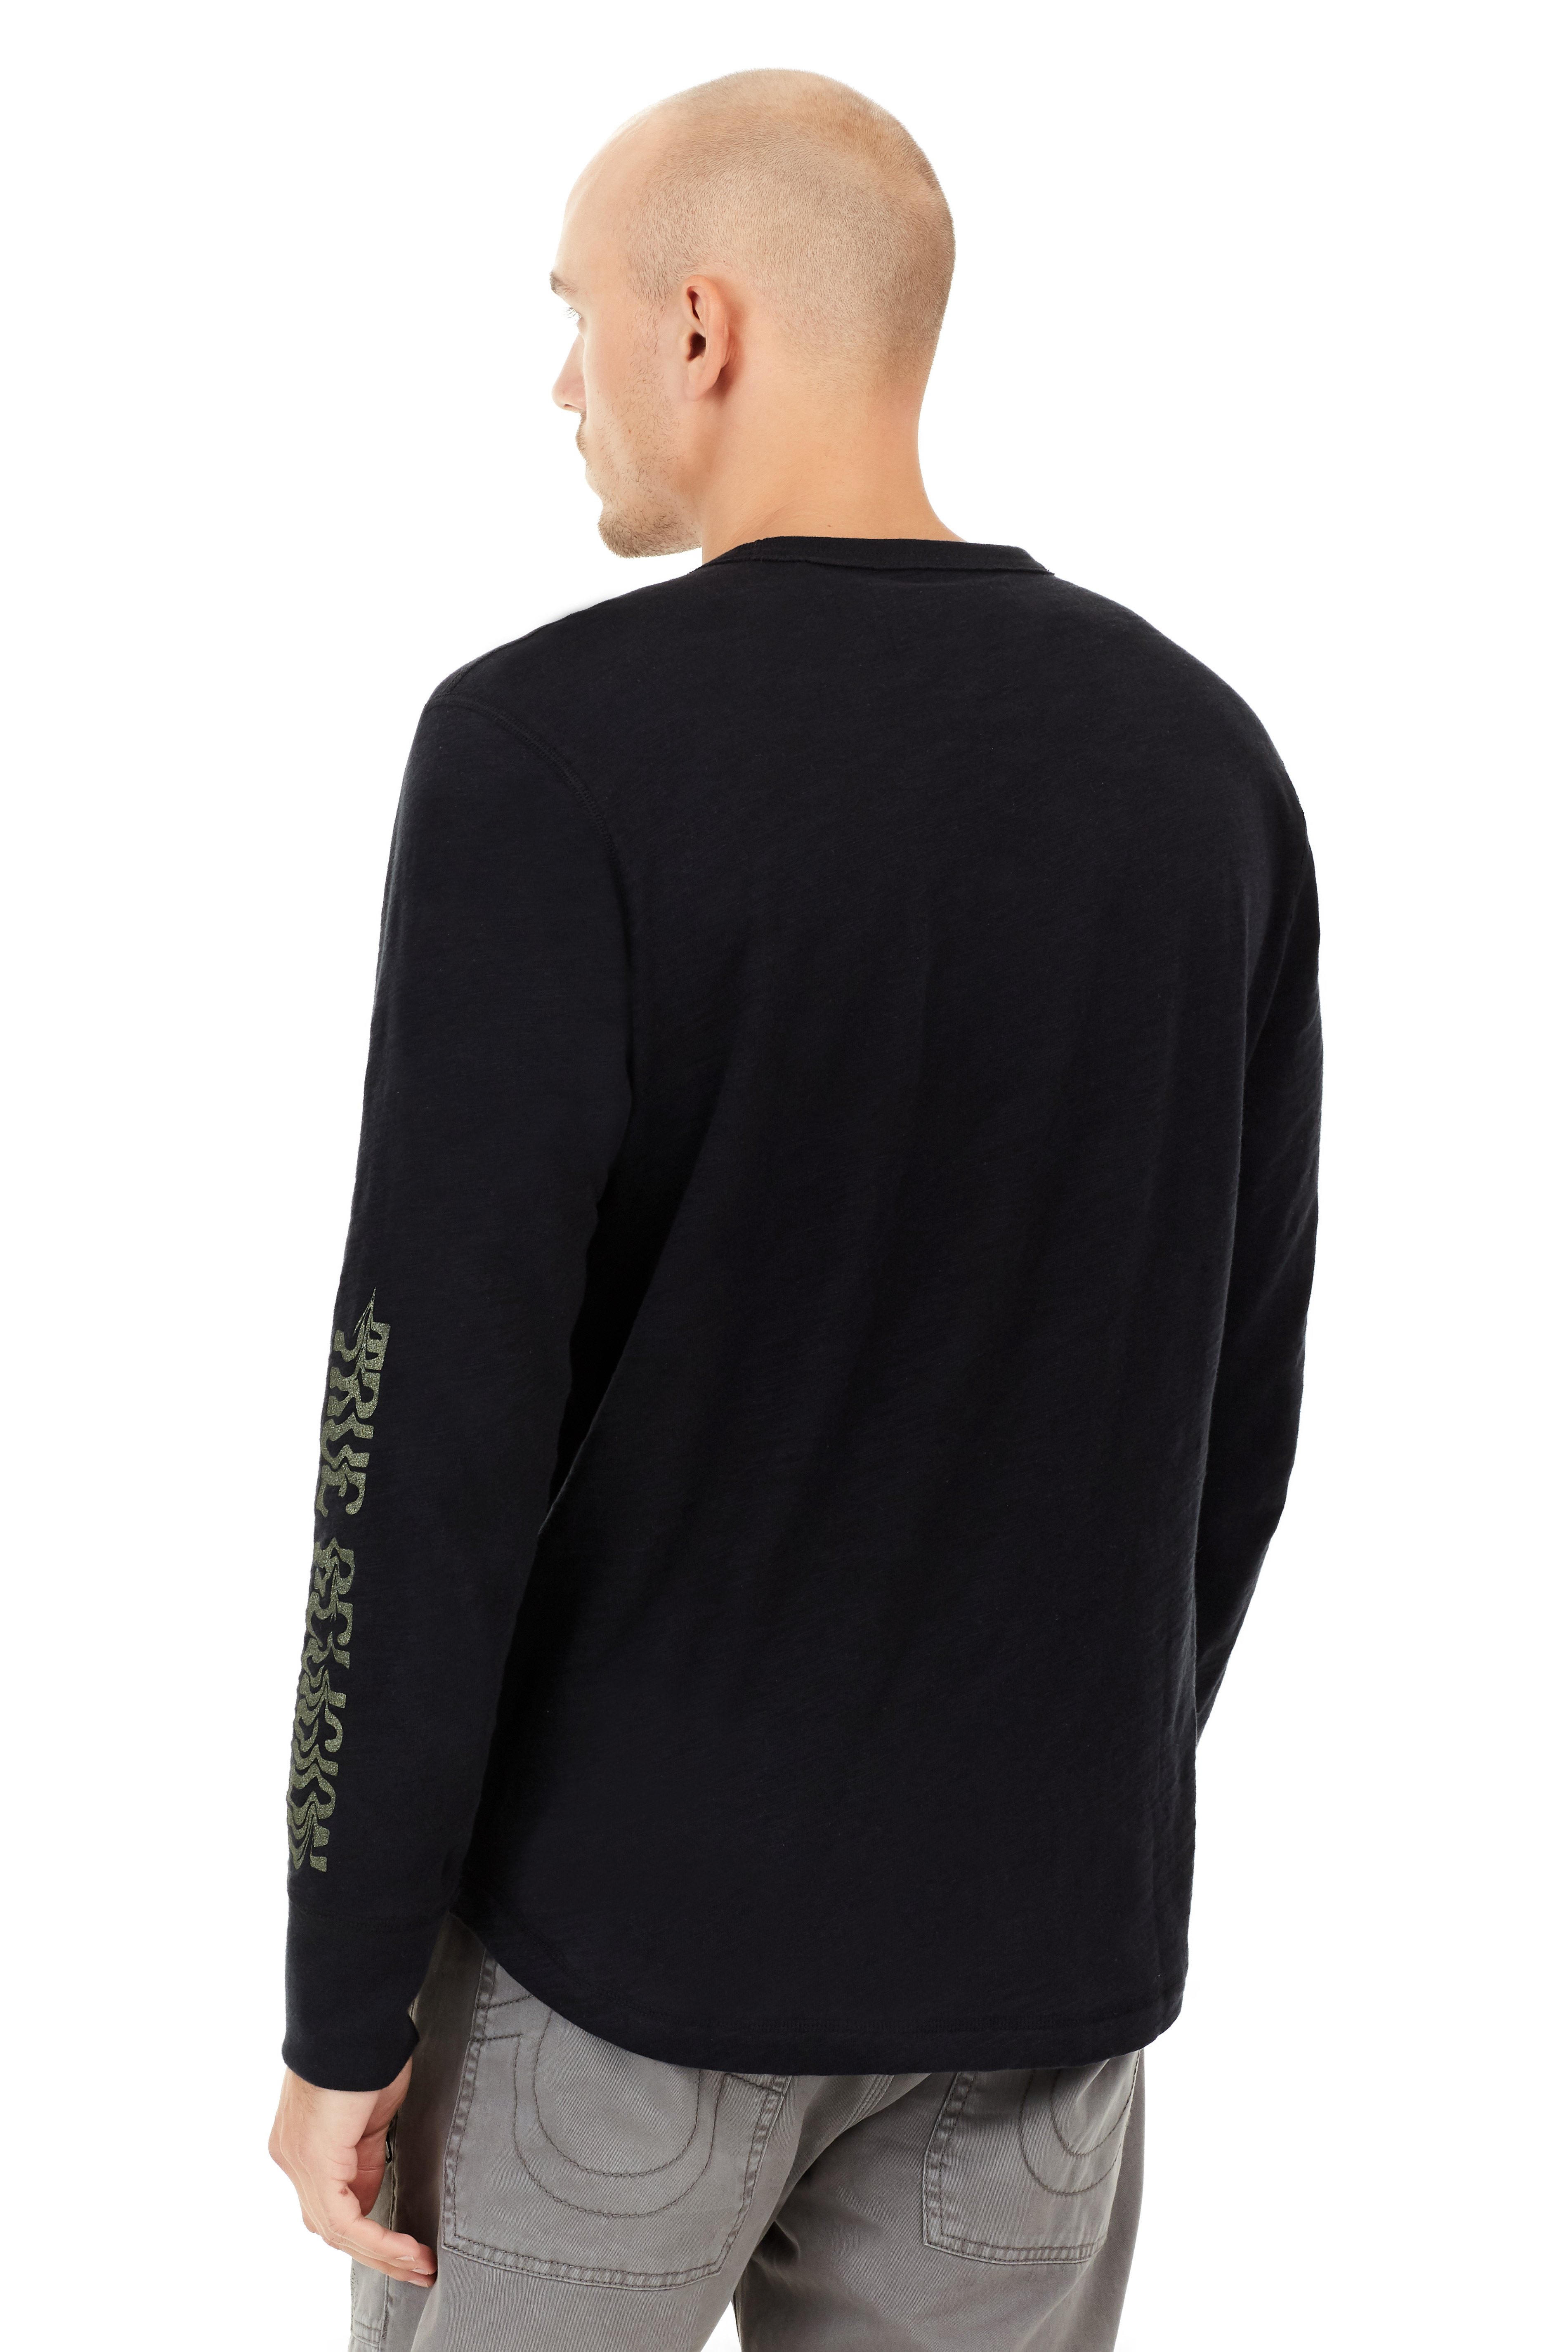 MENS DISTORTED GRAPHIC LONG SLEEVE SHIRT